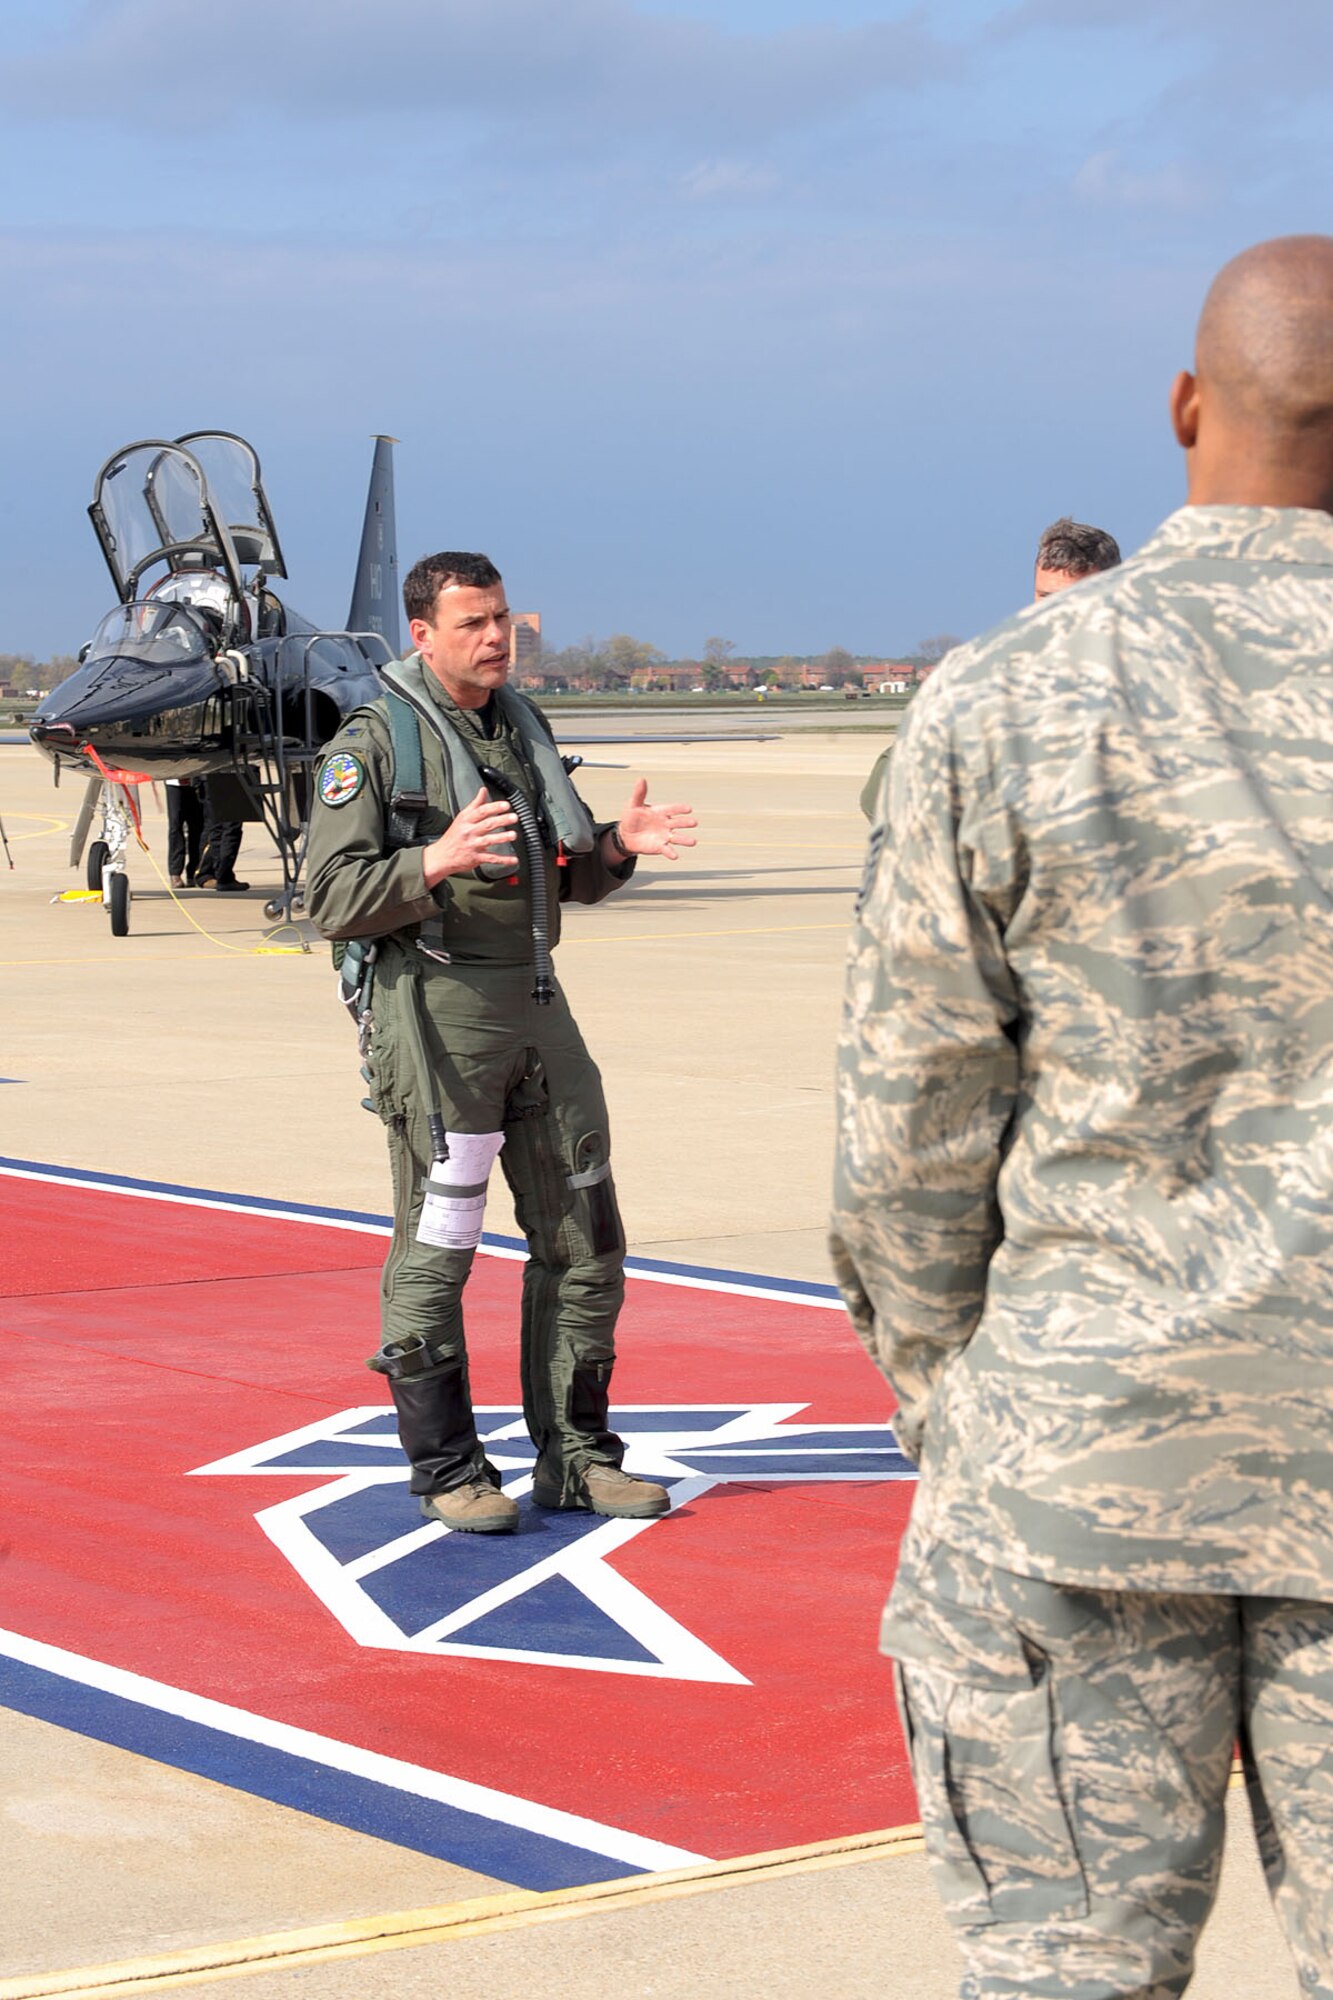 Matthew Molloy, 1st Fighter Wing Commander, addresses members of Team Langley after escorting the T-38 Talon to Langley Air Force Base, Va., April 1, 2011. The aircraft was flown here to help train 1st FW pilots and prepare them for when it is permanently stationed here. (U.S. Air Force photo by Staff Sgt. Ashley Hawkins/Released)